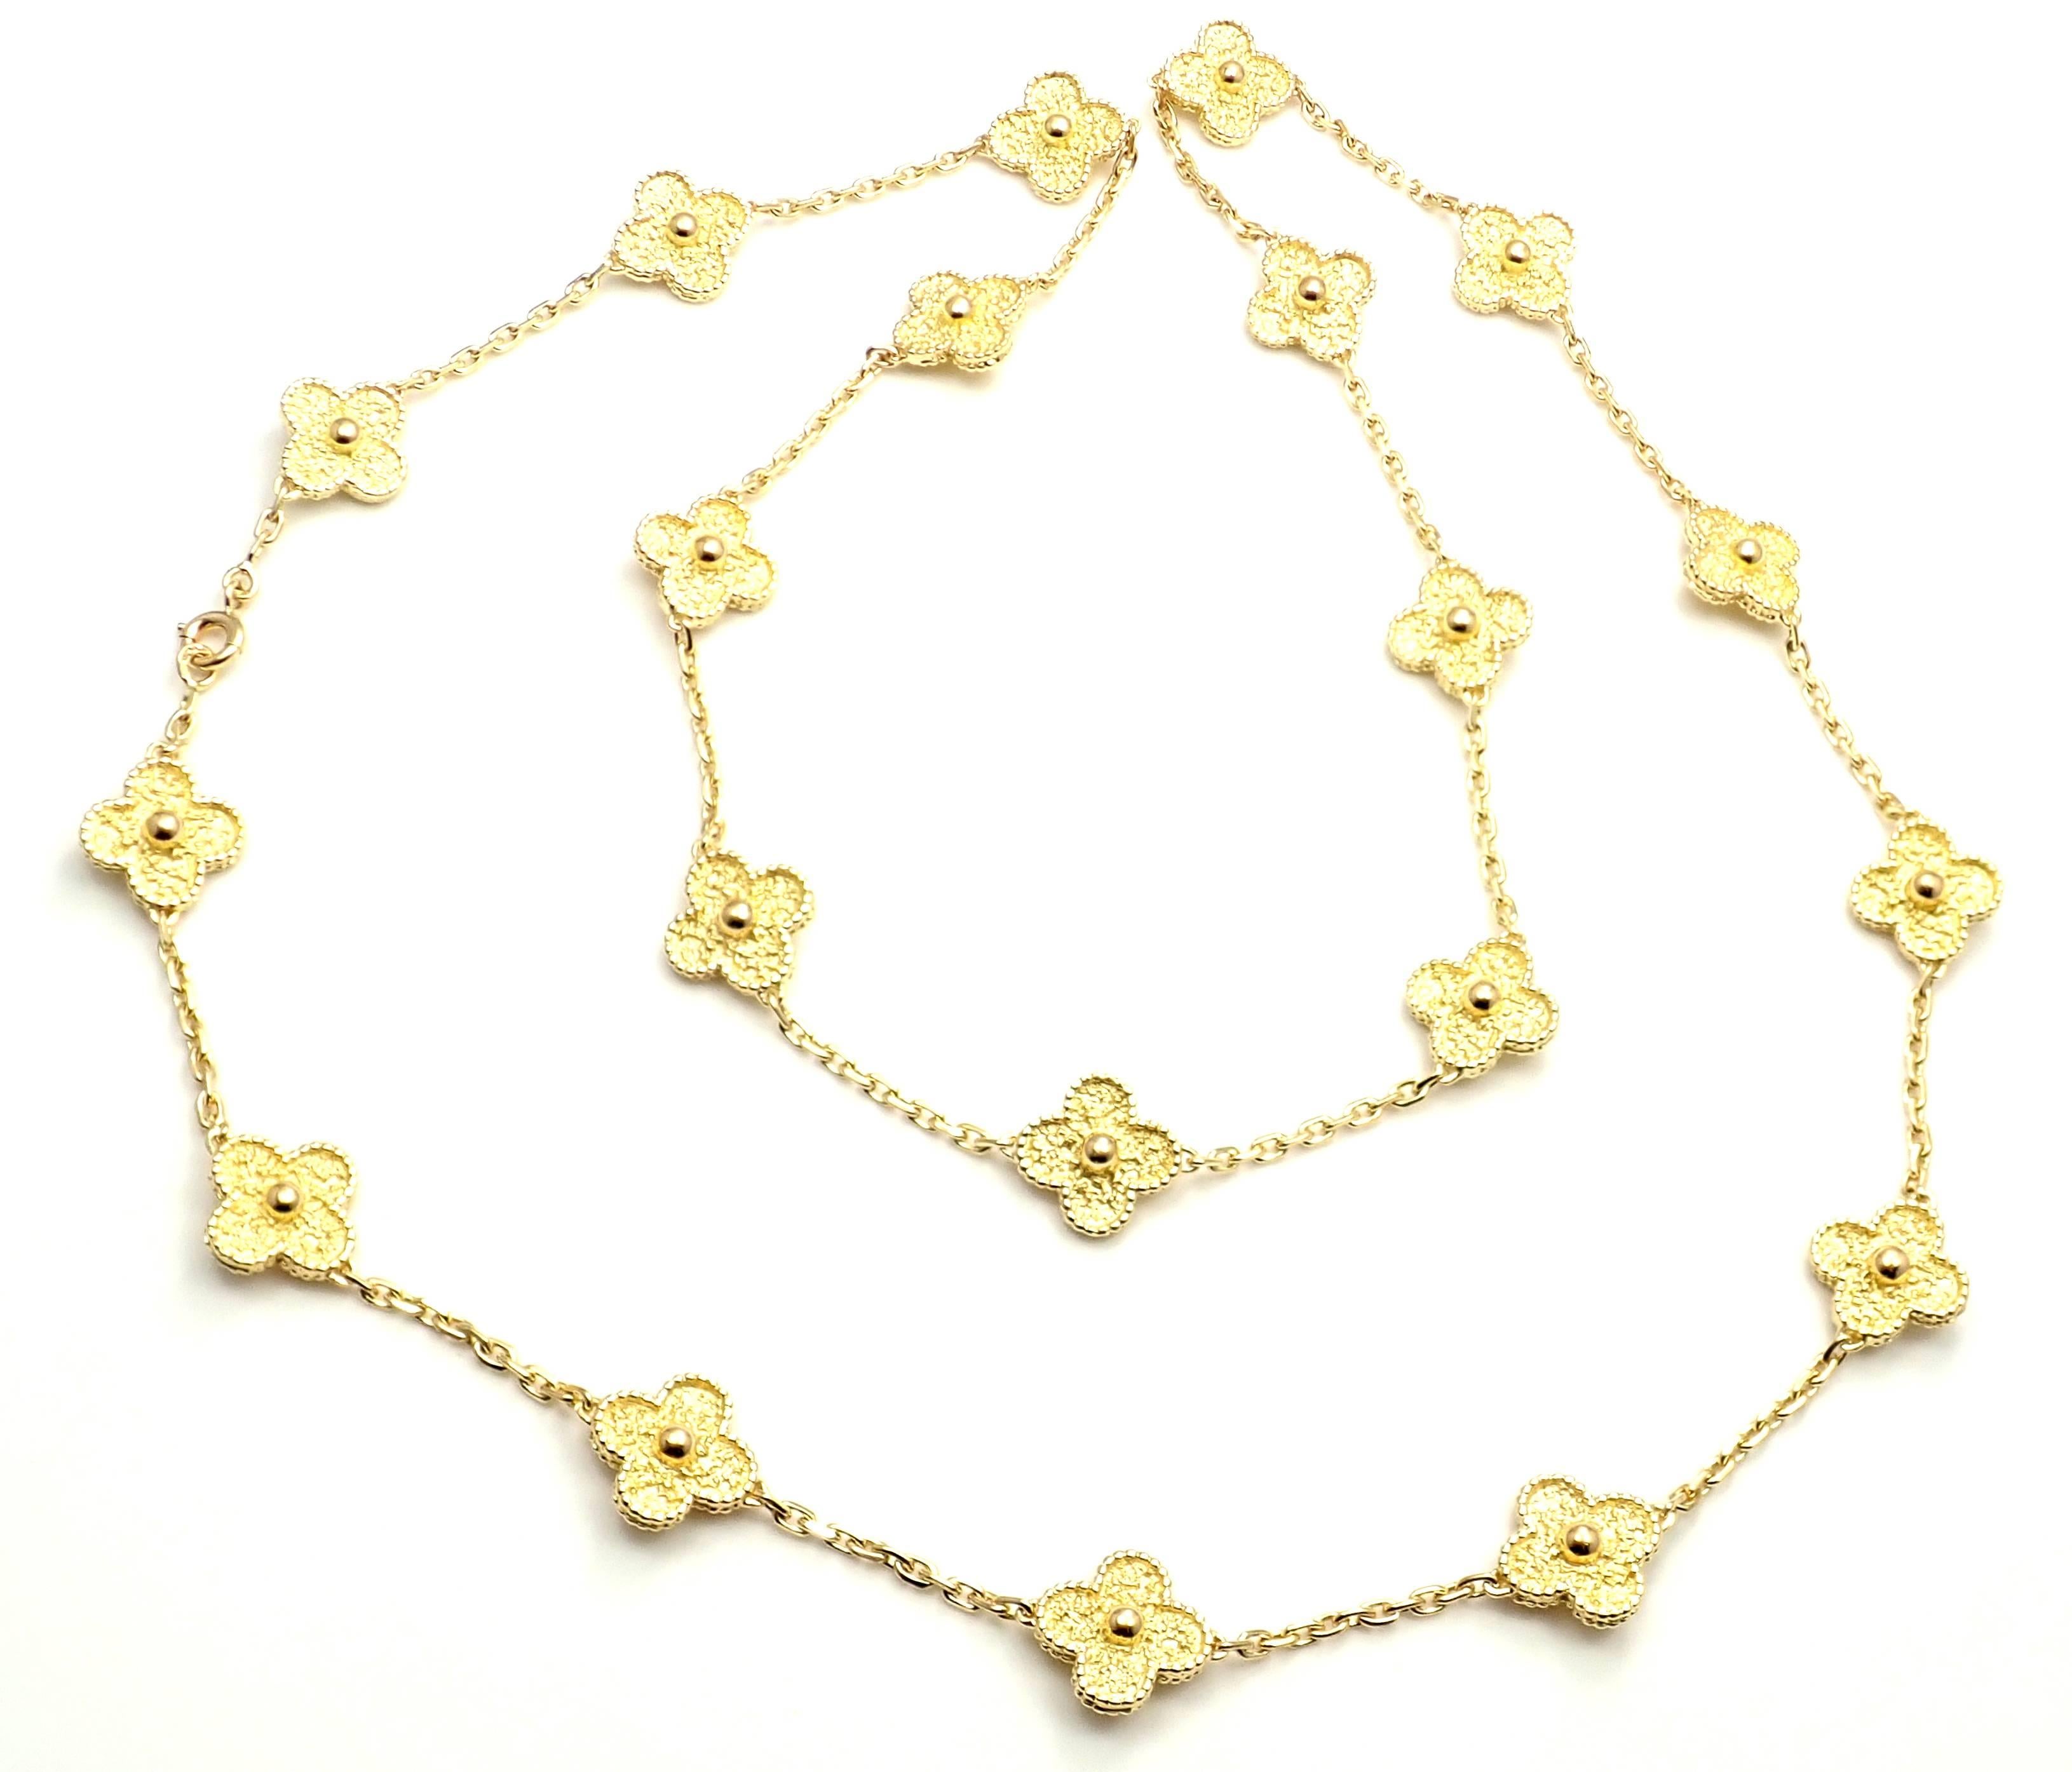 18k Yellow Gold Alhambra 20 Motif Necklace by Van Cleef & Arpels. 
With 20 motifs of 18k yellow gold alhambras 15mm each.
This necklace comes with VCA box and VCA service paper.
Details: 
Length: 31.5